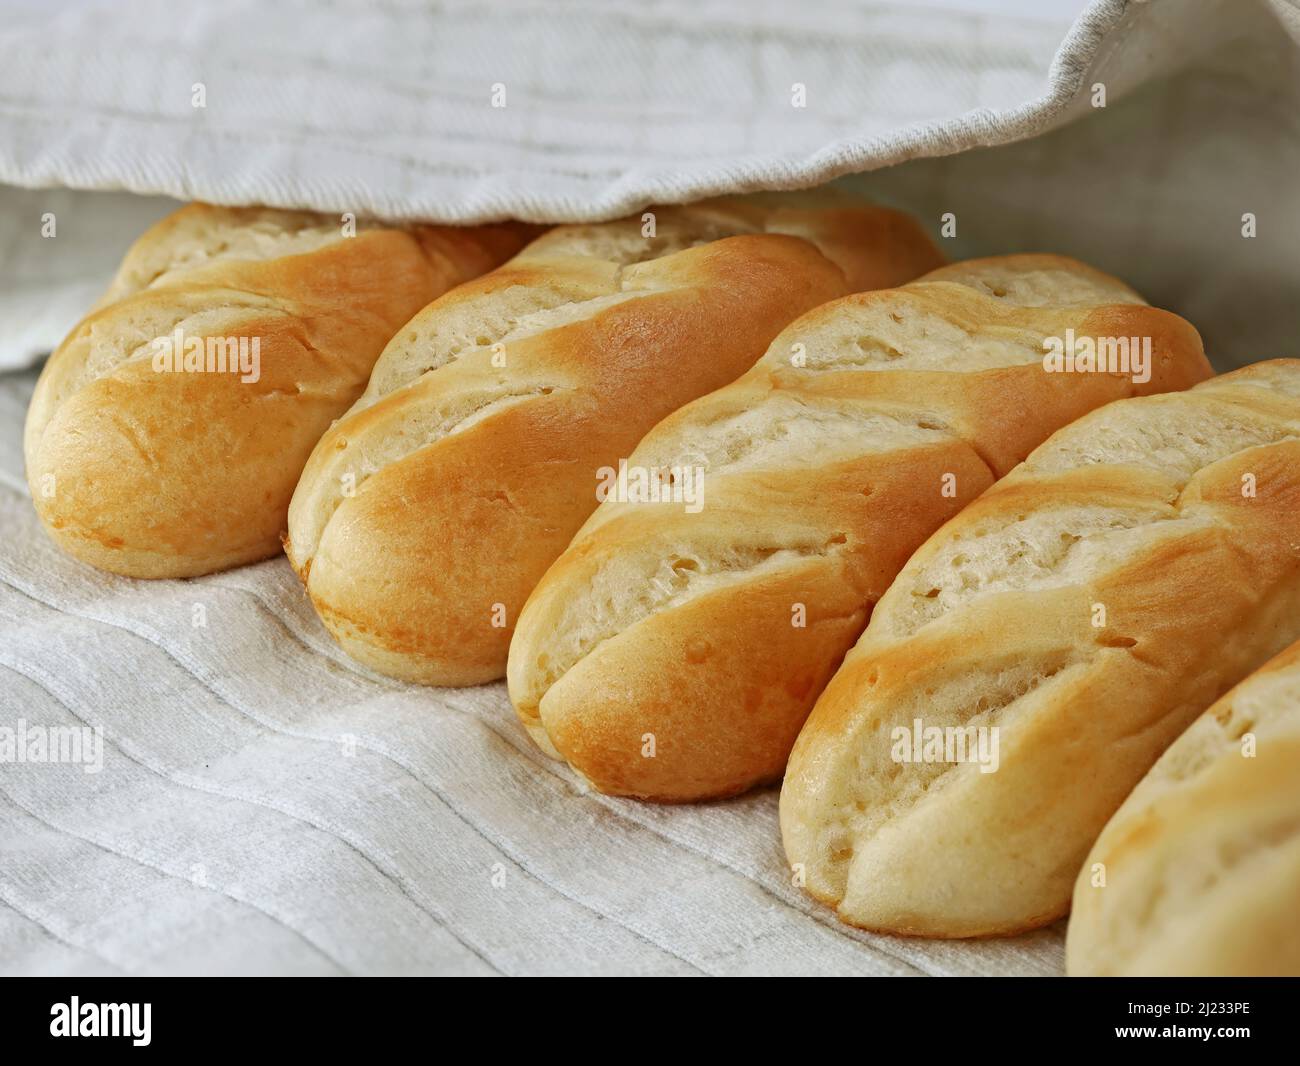 french milk bread buns on gray kitchen towel, close up of delicious french food Stock Photo